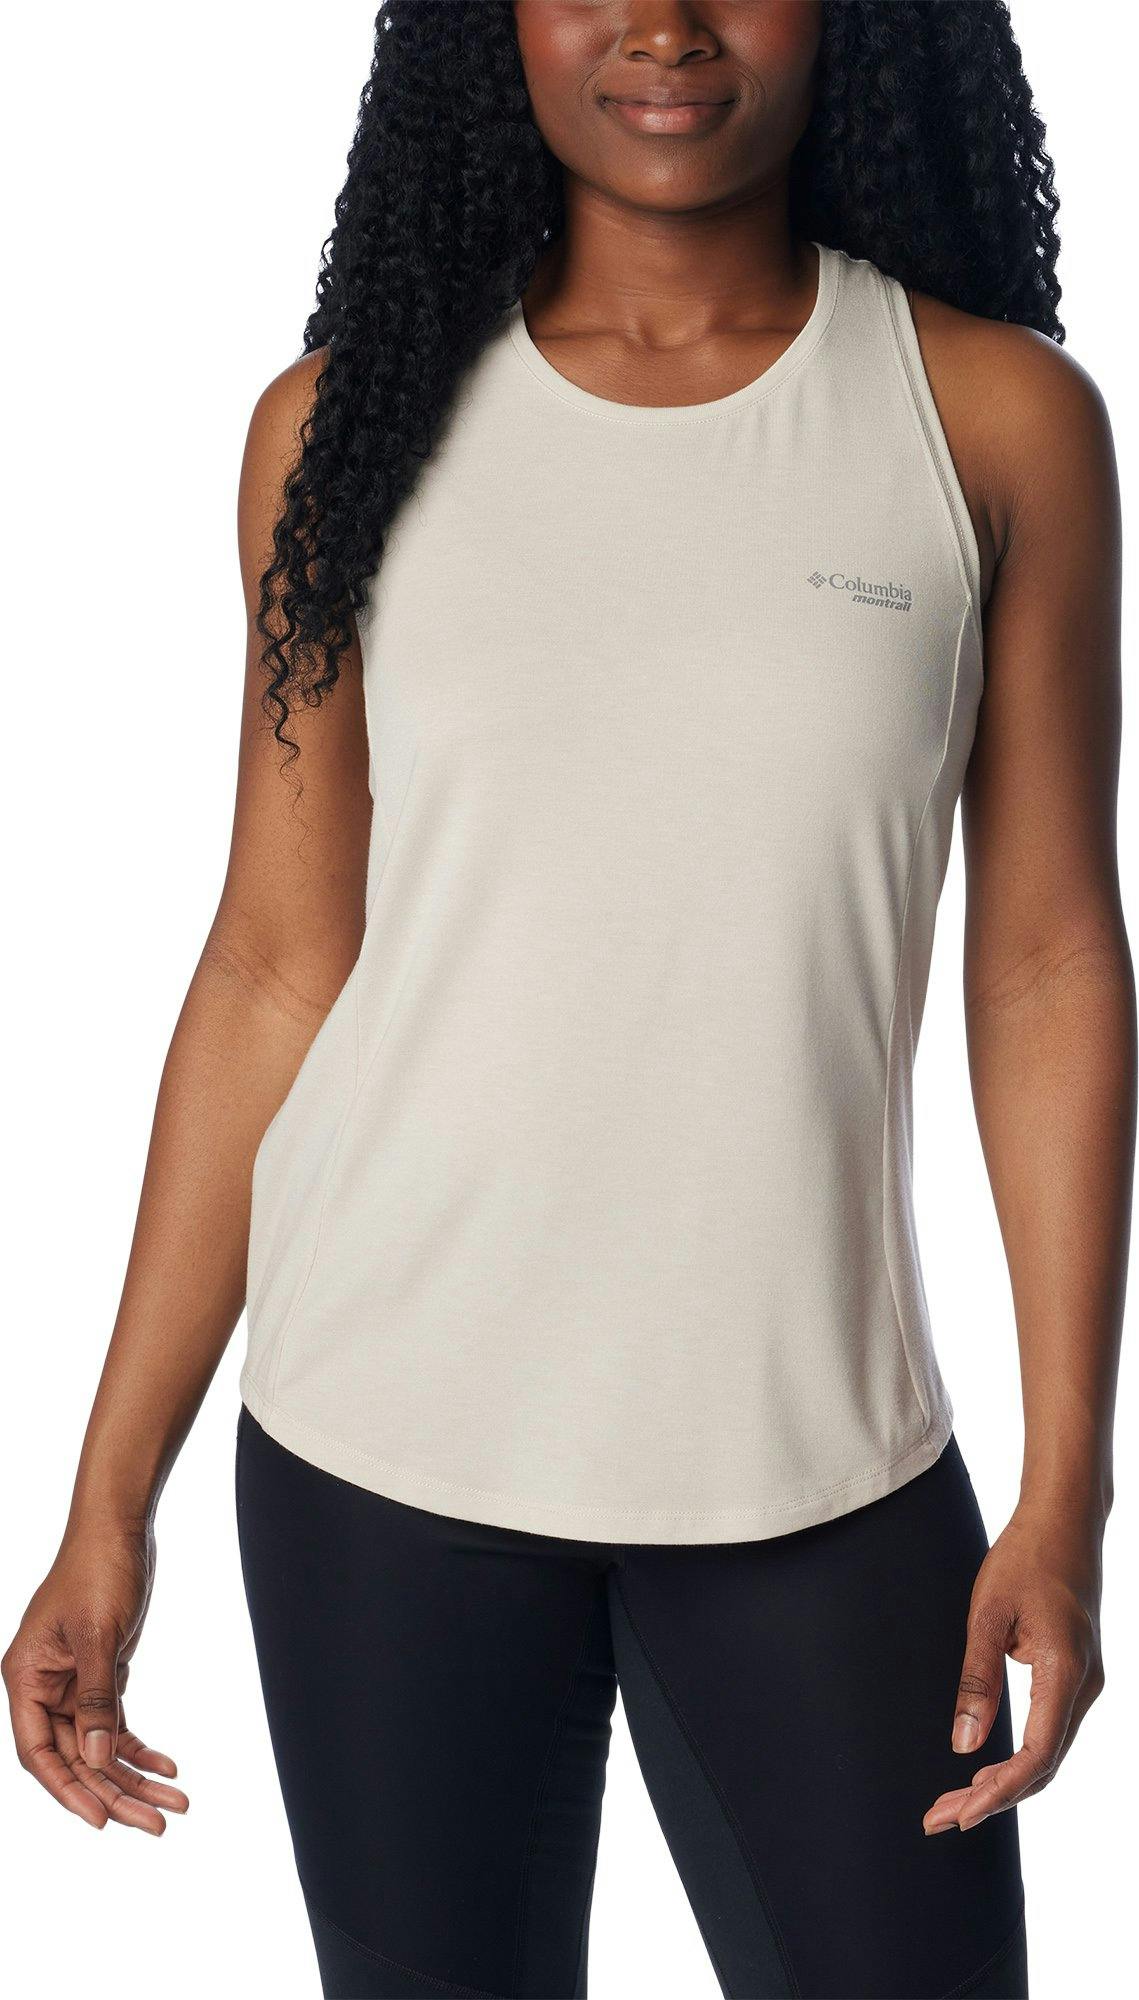 Product image for Endless Trail Running Tank - Women's